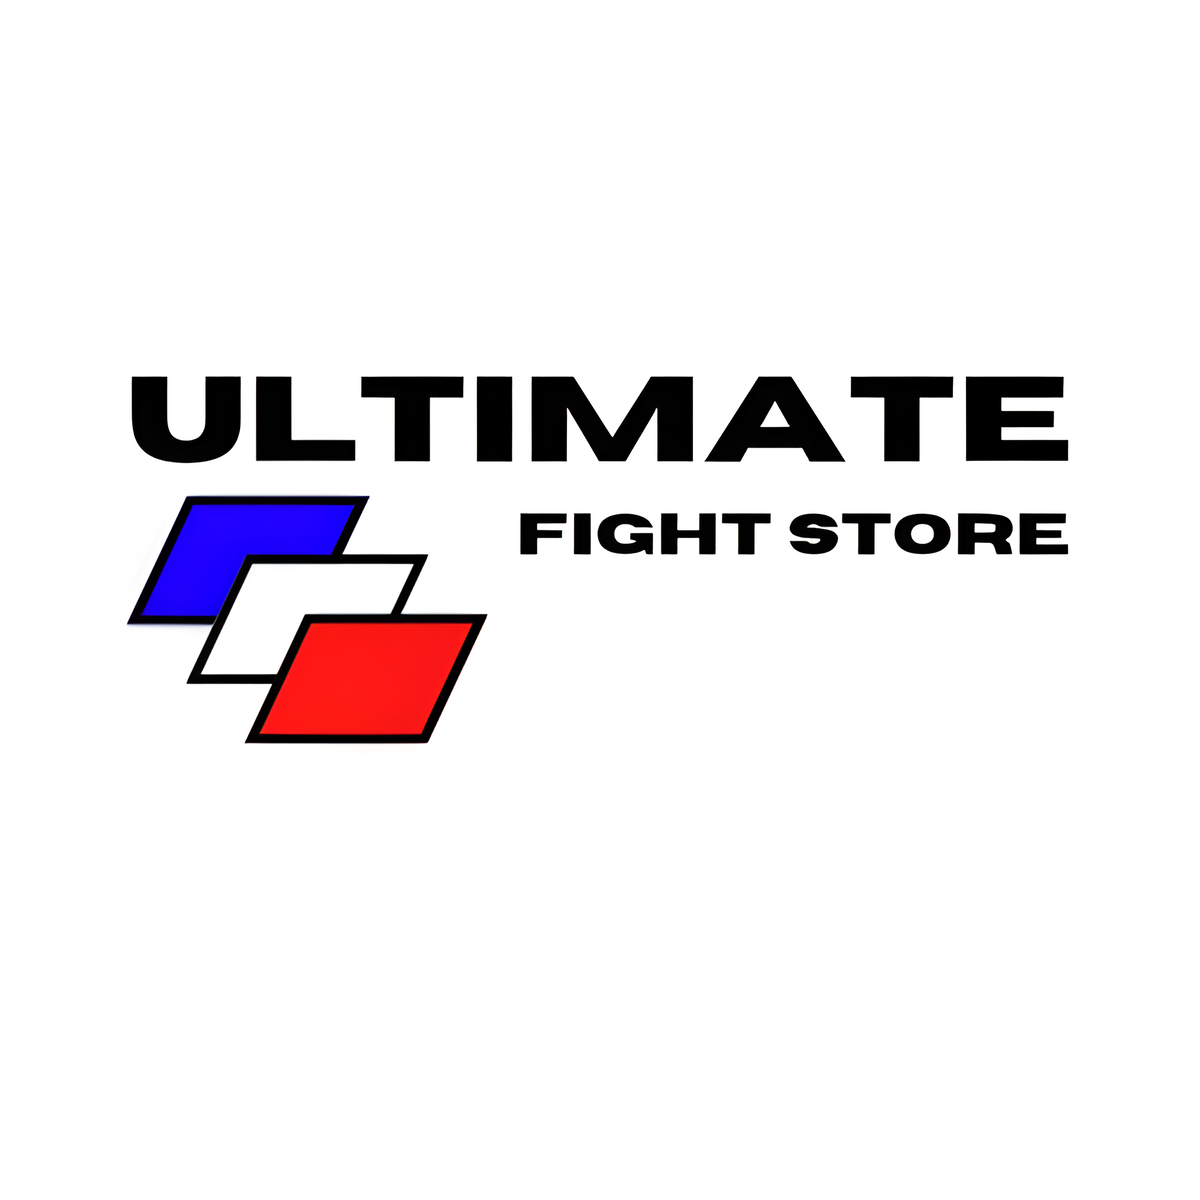 Ultimate Fight Store